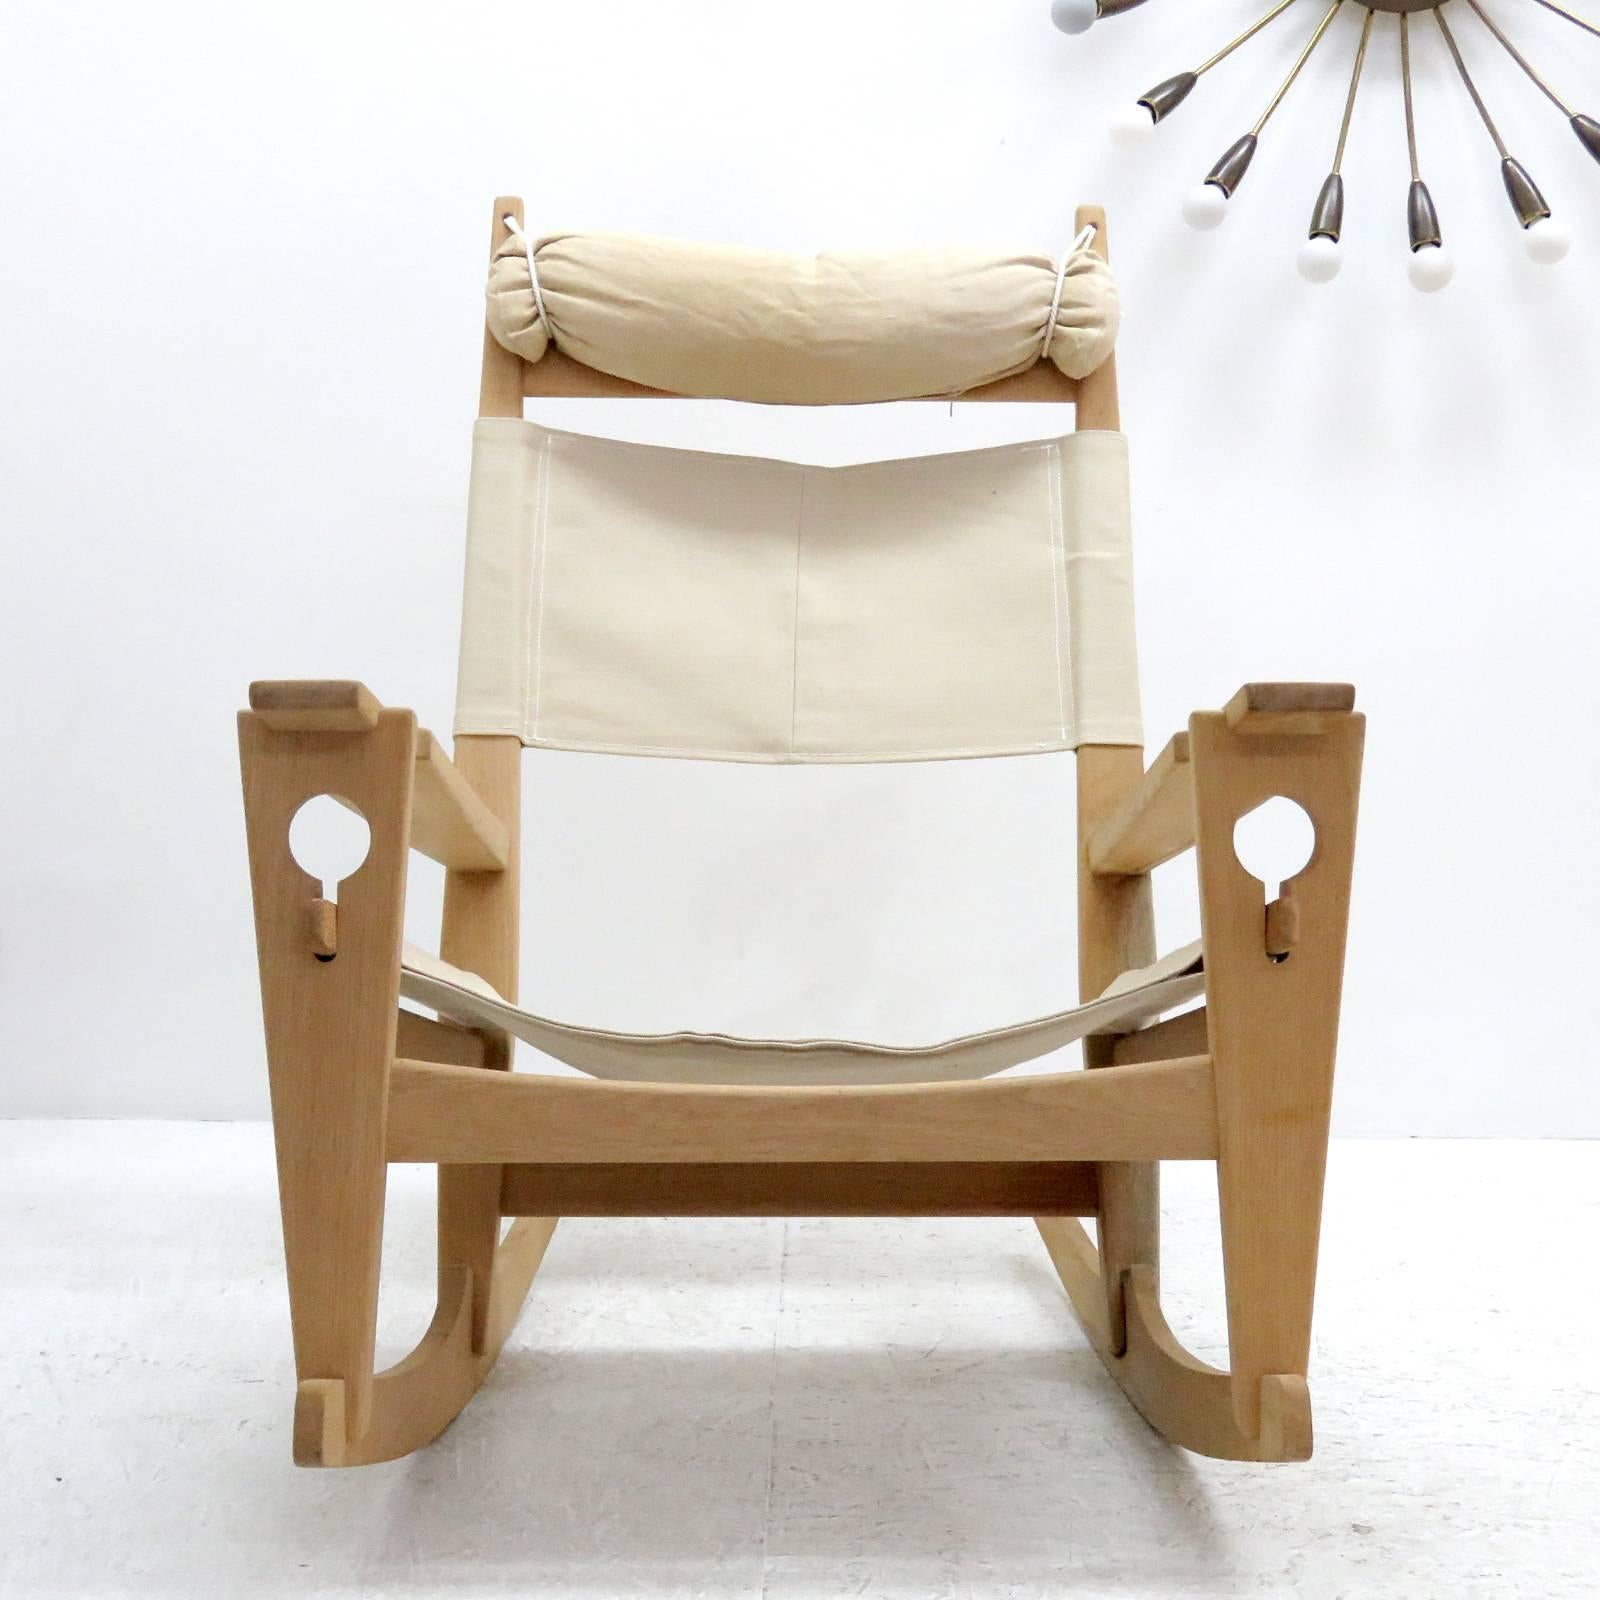 Wonderful rocking chair 'Keyhole' model GE-673, by Hans Wegner for GETAMA, designed in 1967, oak frame with natural linen of later date and original head rest, all wood joints without metal hardware featuring the unique keyhole-shaped joinery that